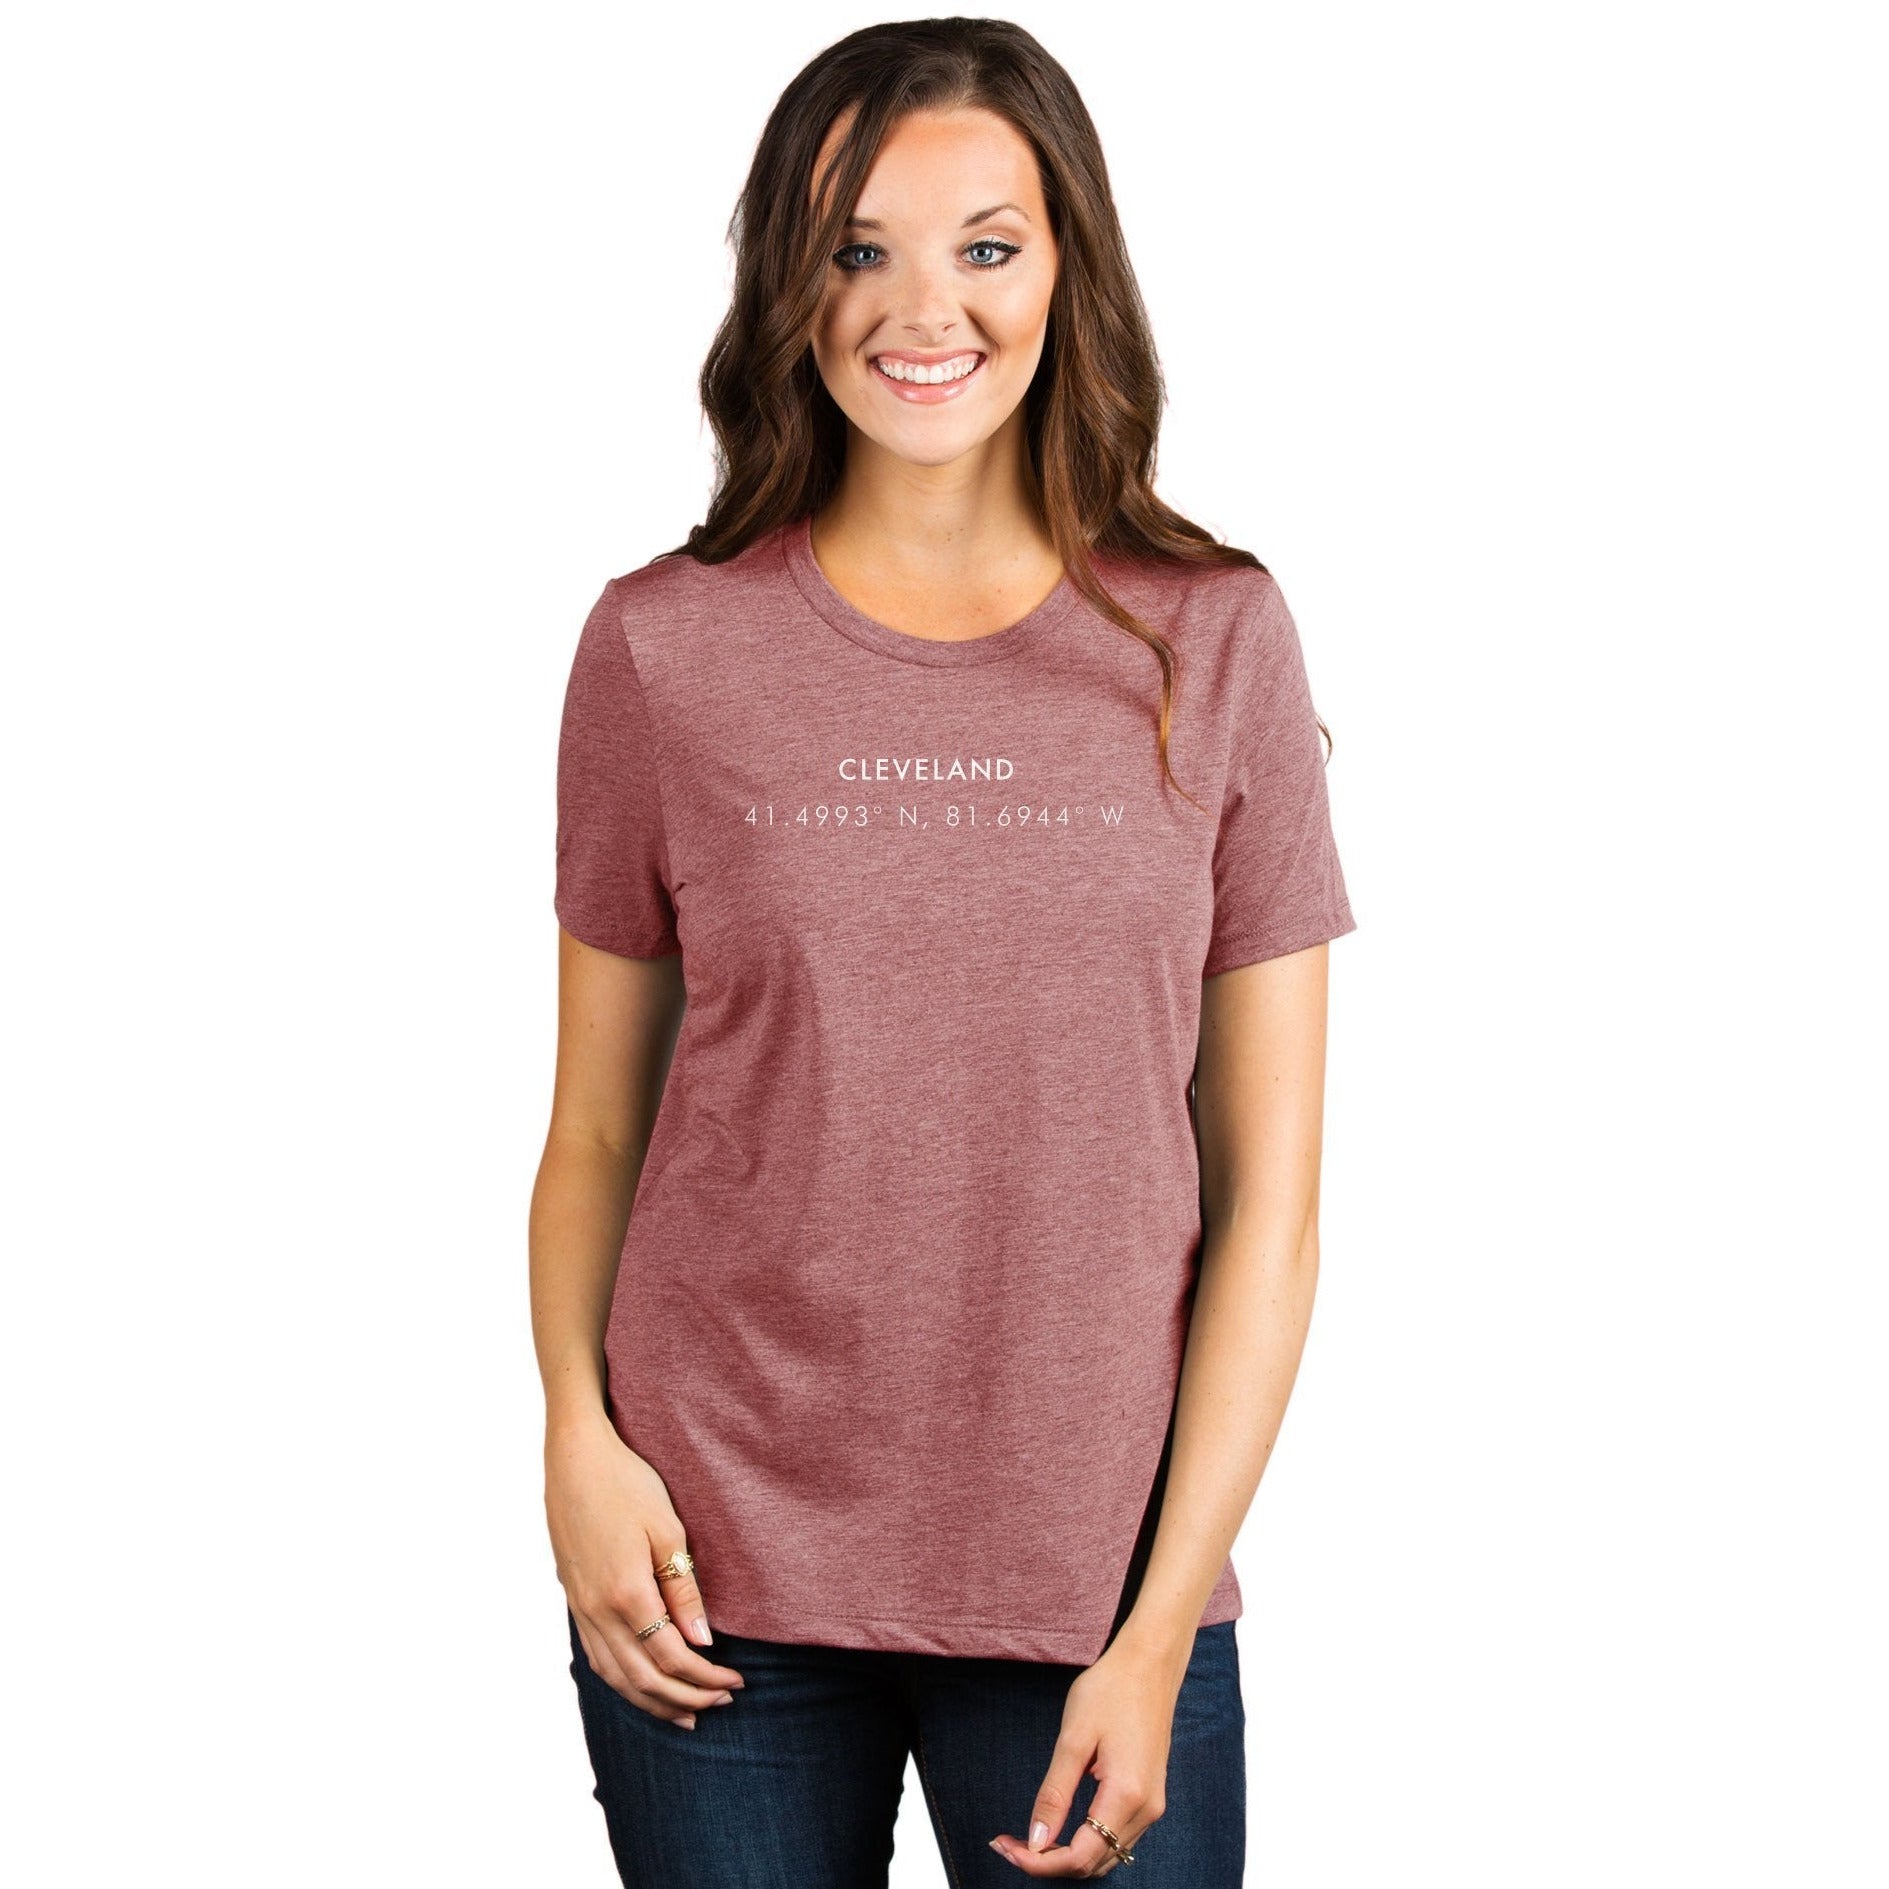 Cleveland Ohio Coordinates Women's Relaxed Crewneck T-Shirt Top Tee Heather Rouge Model
